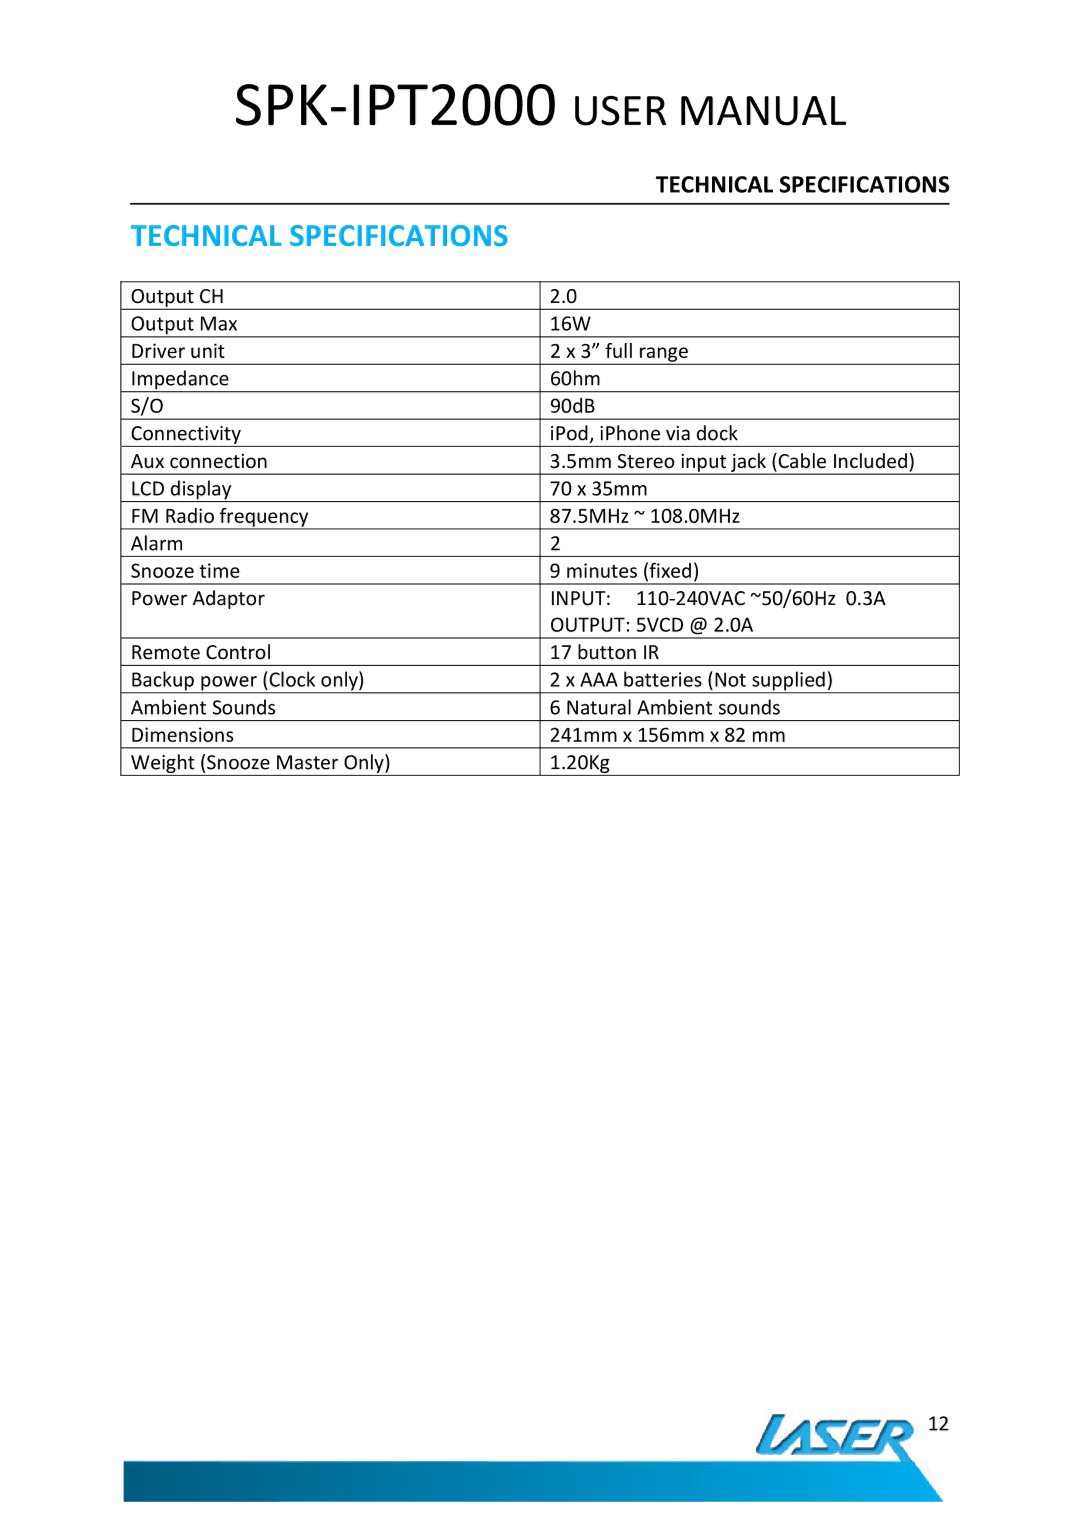 Laser SPK-IPT2000 user manual Technical Specifications, Output 5VCD @ 2.0A 